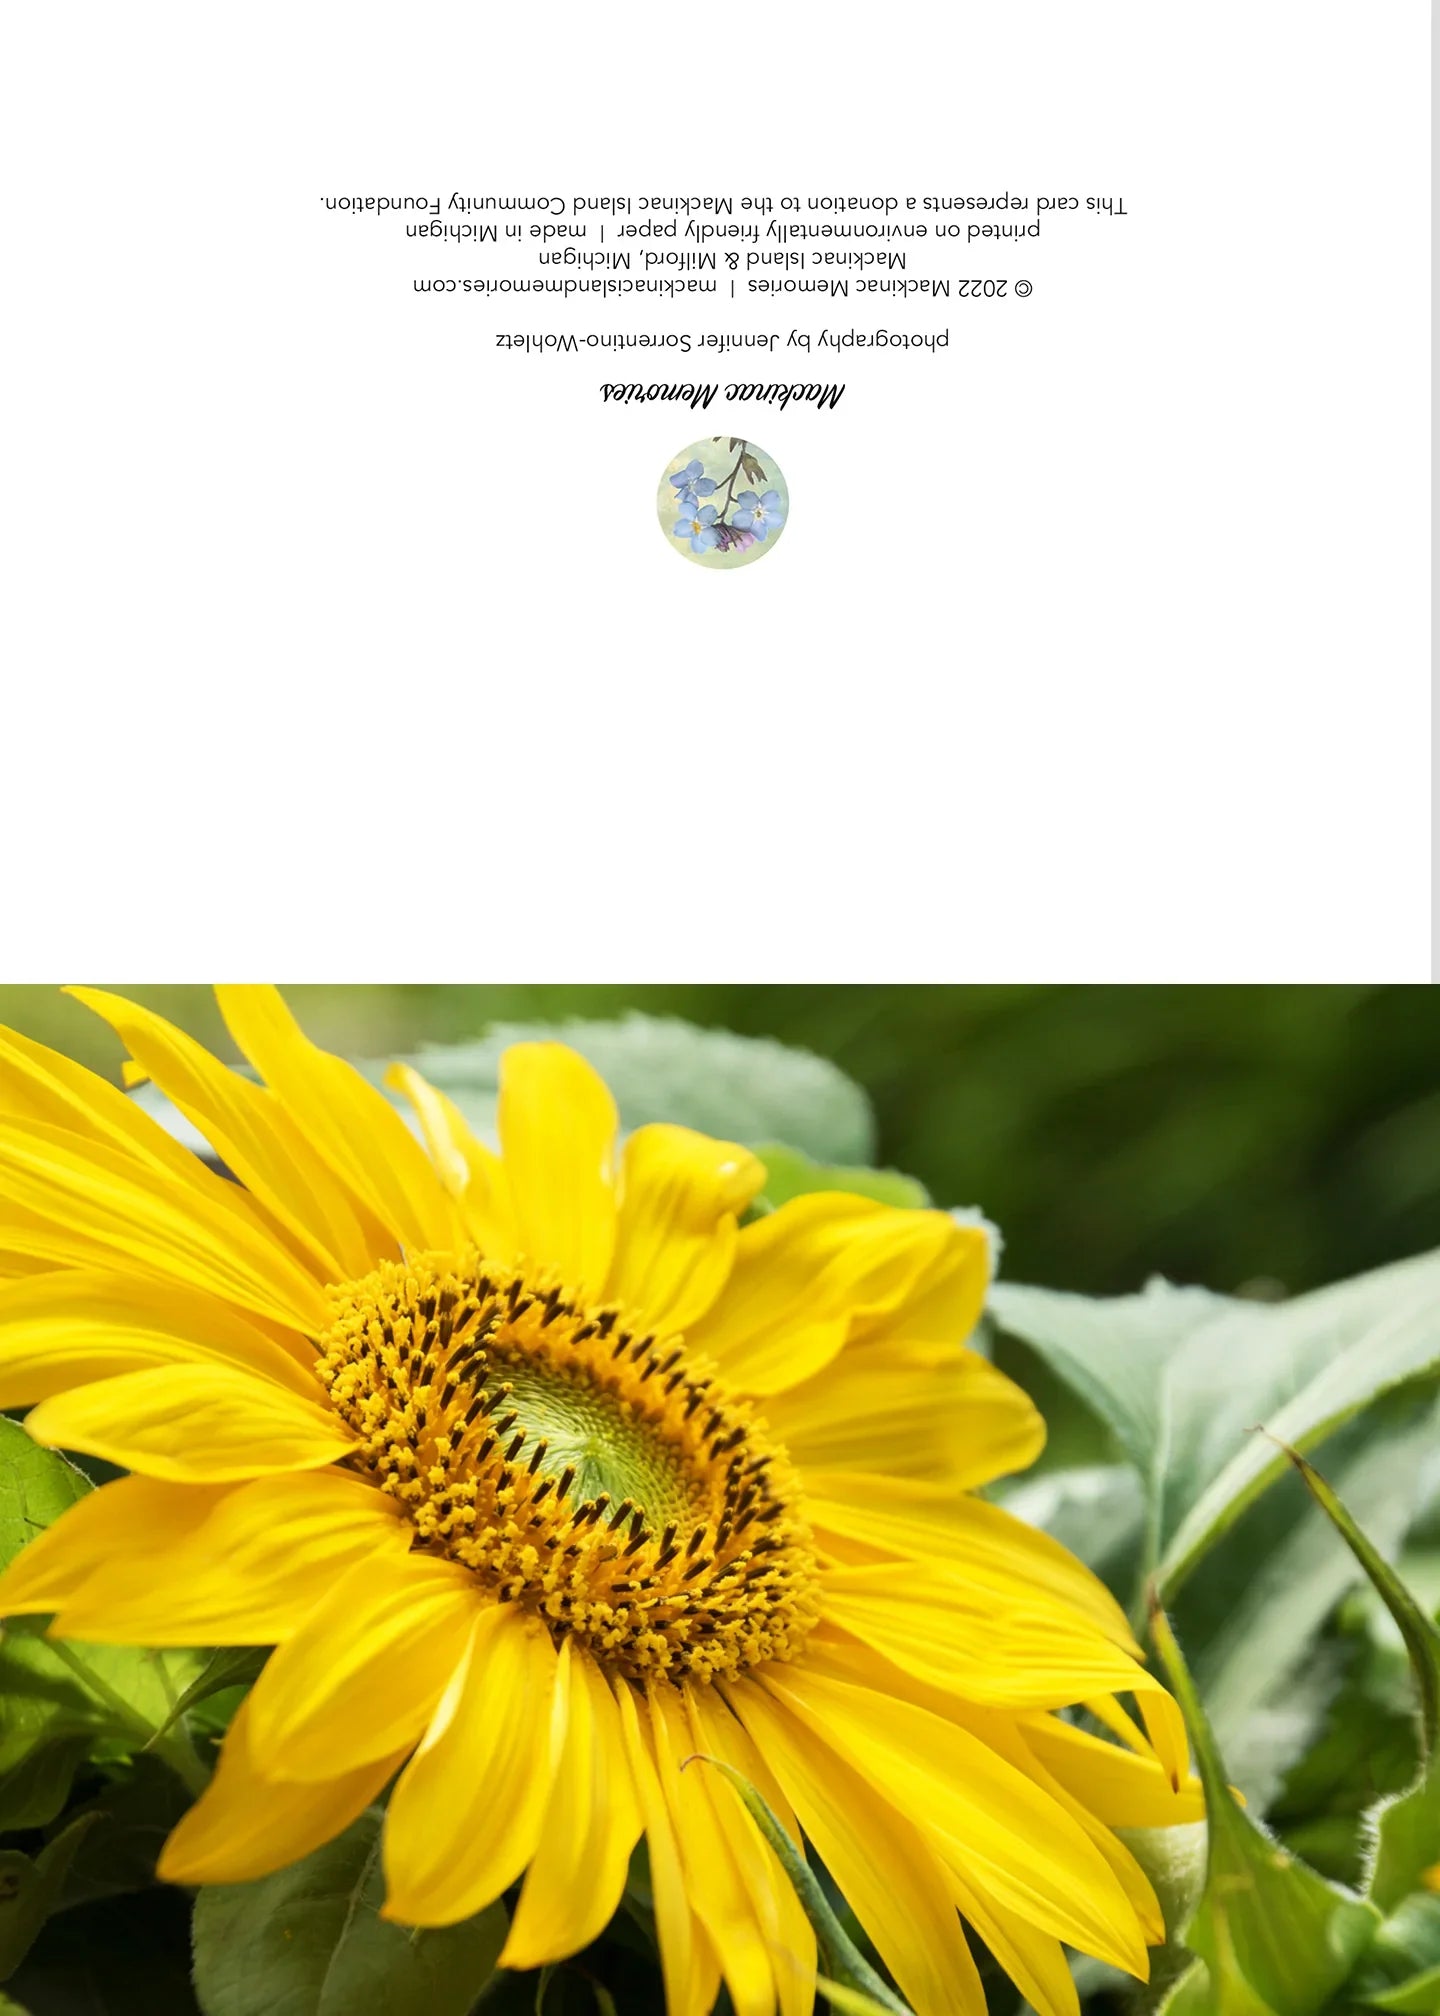 Blank greeting card featuring a photograph of a sunflower by local artist Jennifer Wohletz of Mackinac Memories.